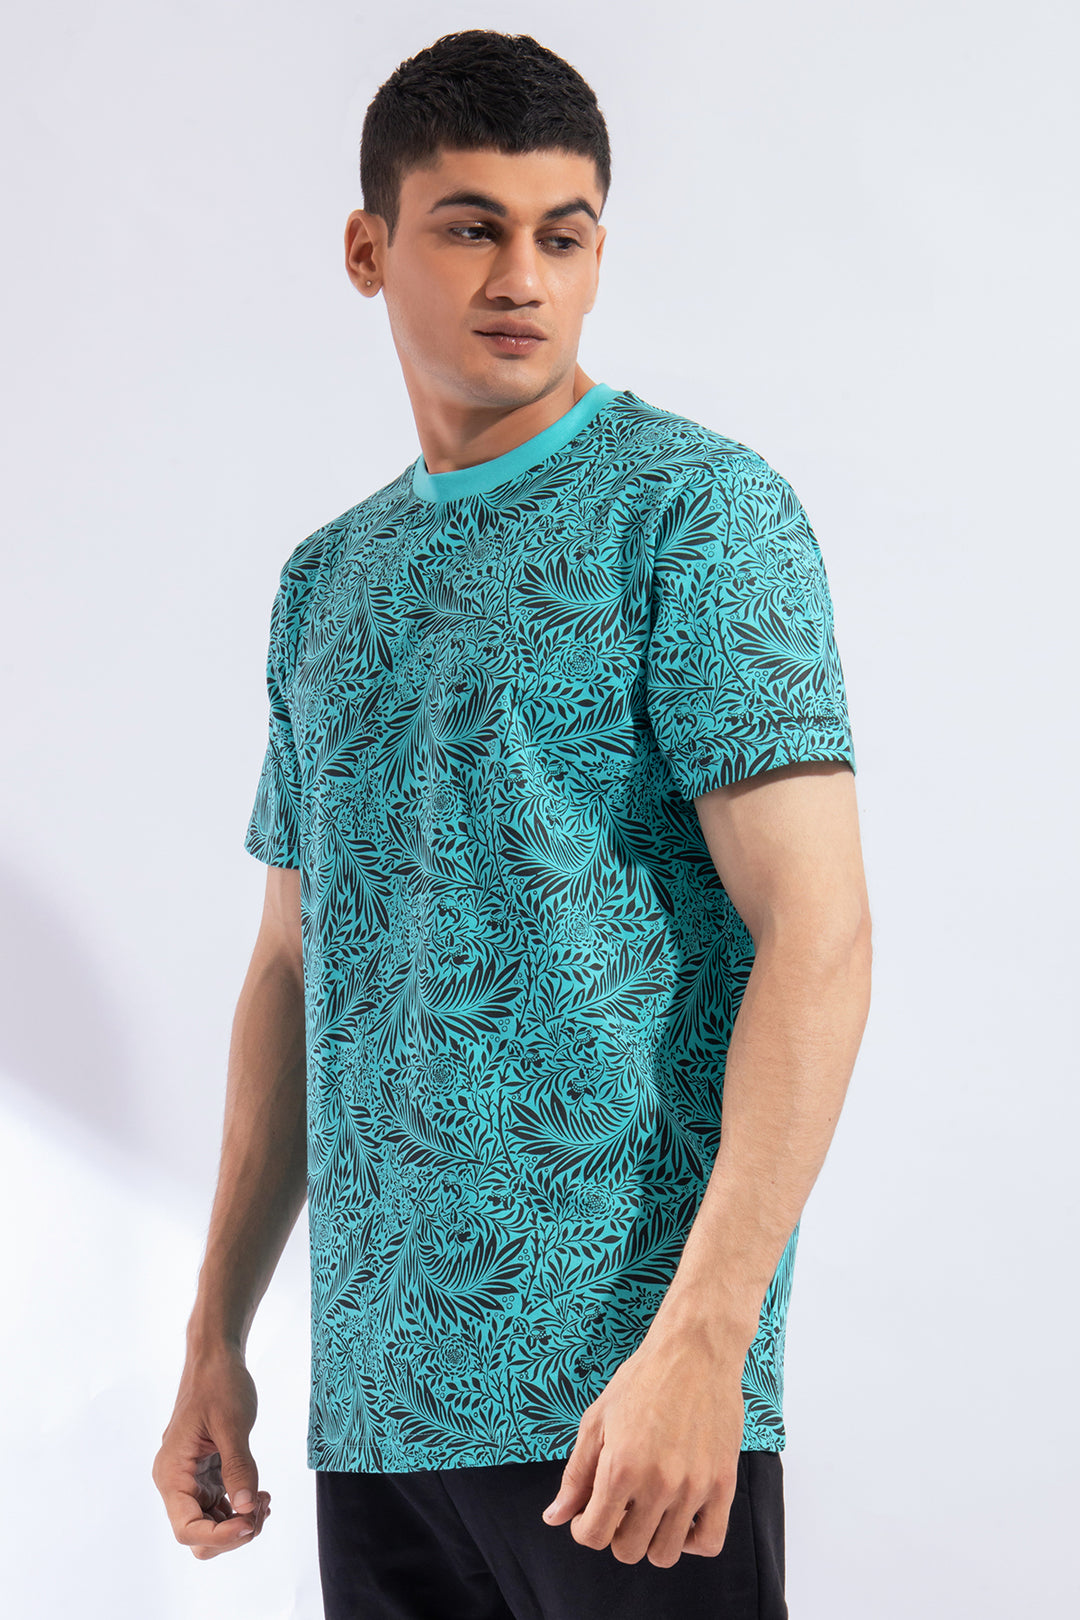 Turquoise Printed T-Shirt - A24 - MT0330R